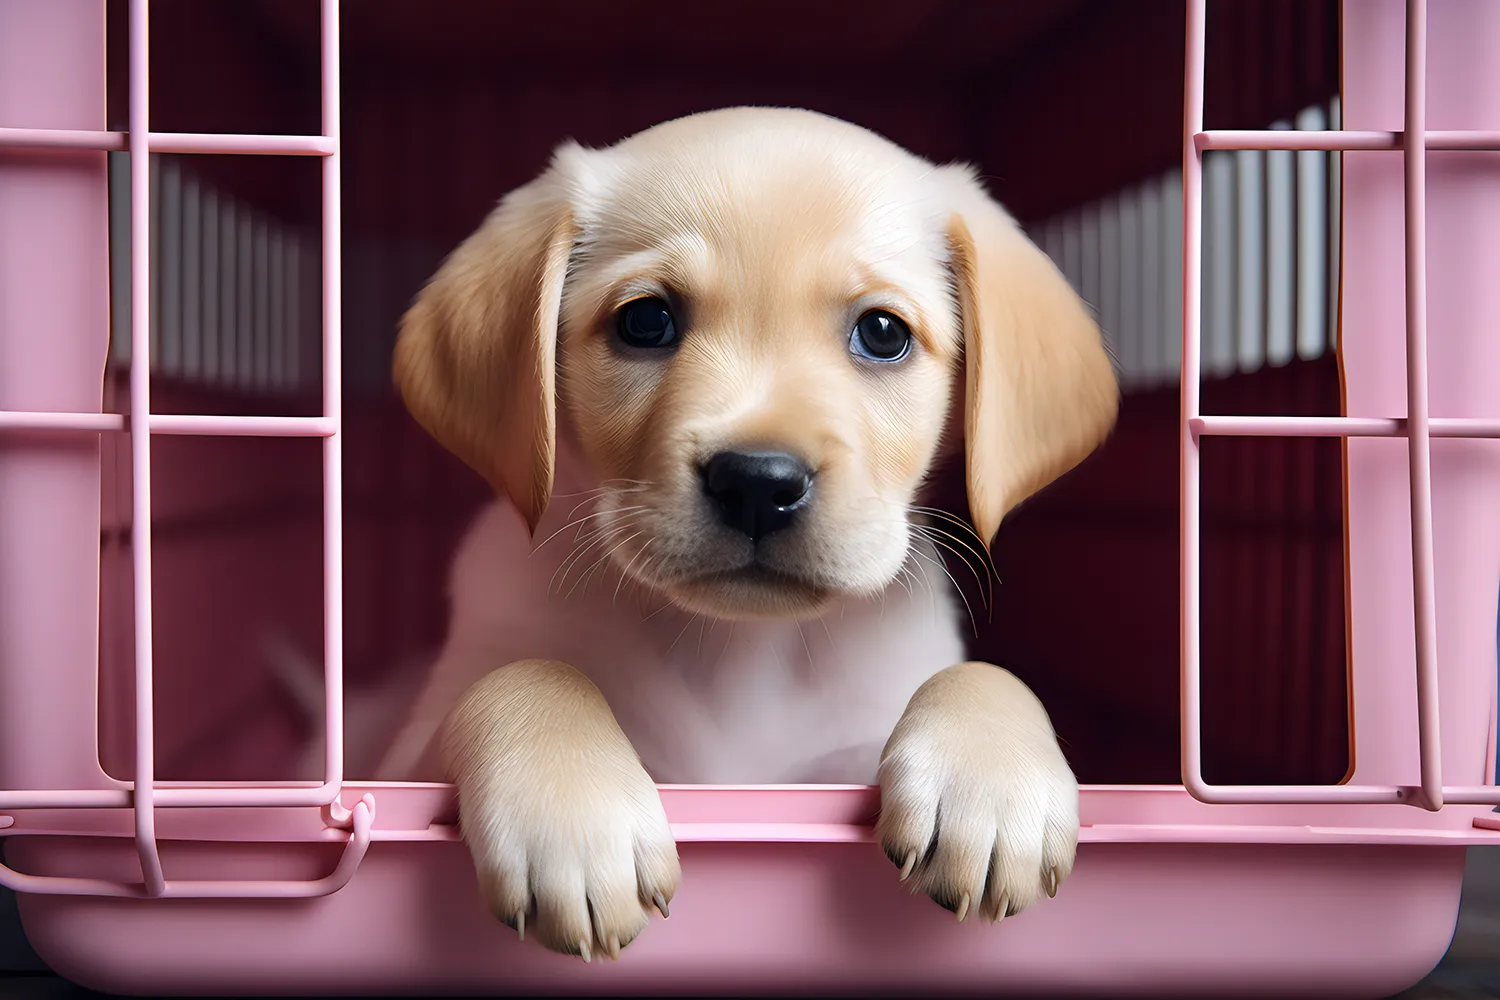 A Short Guide To Crate Training Your Dog